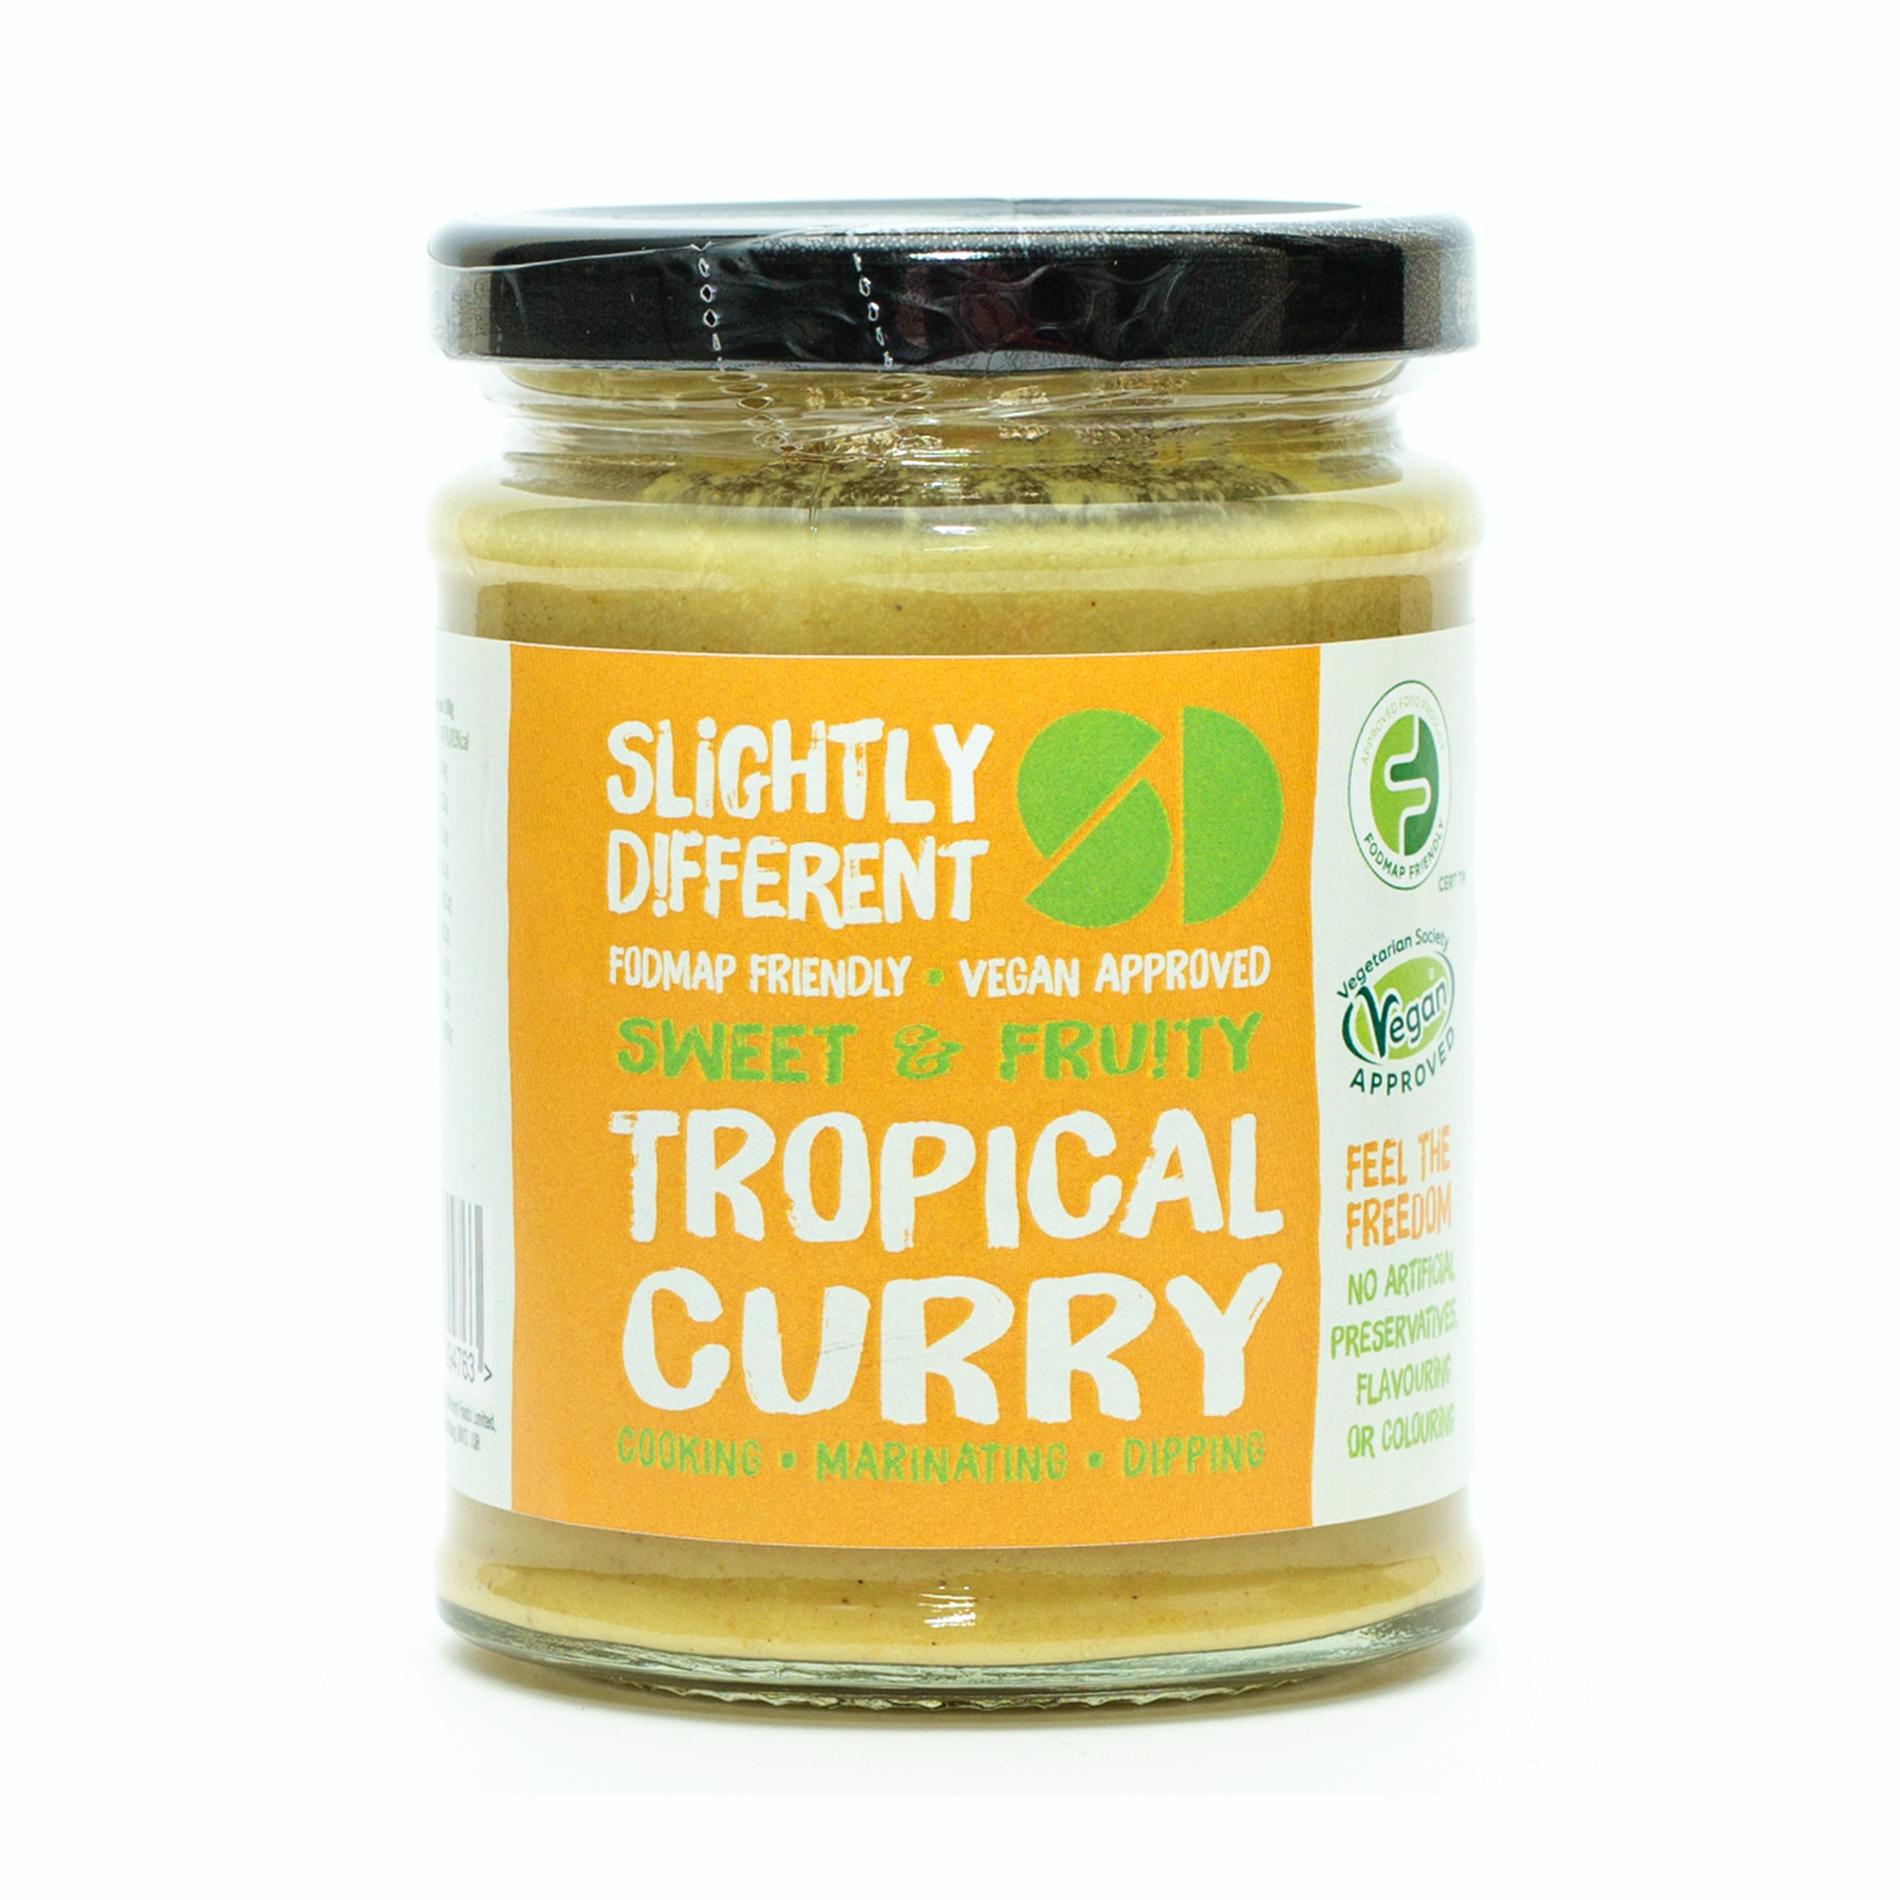 A jar of Slightly Different's Tropical Curry Sauce